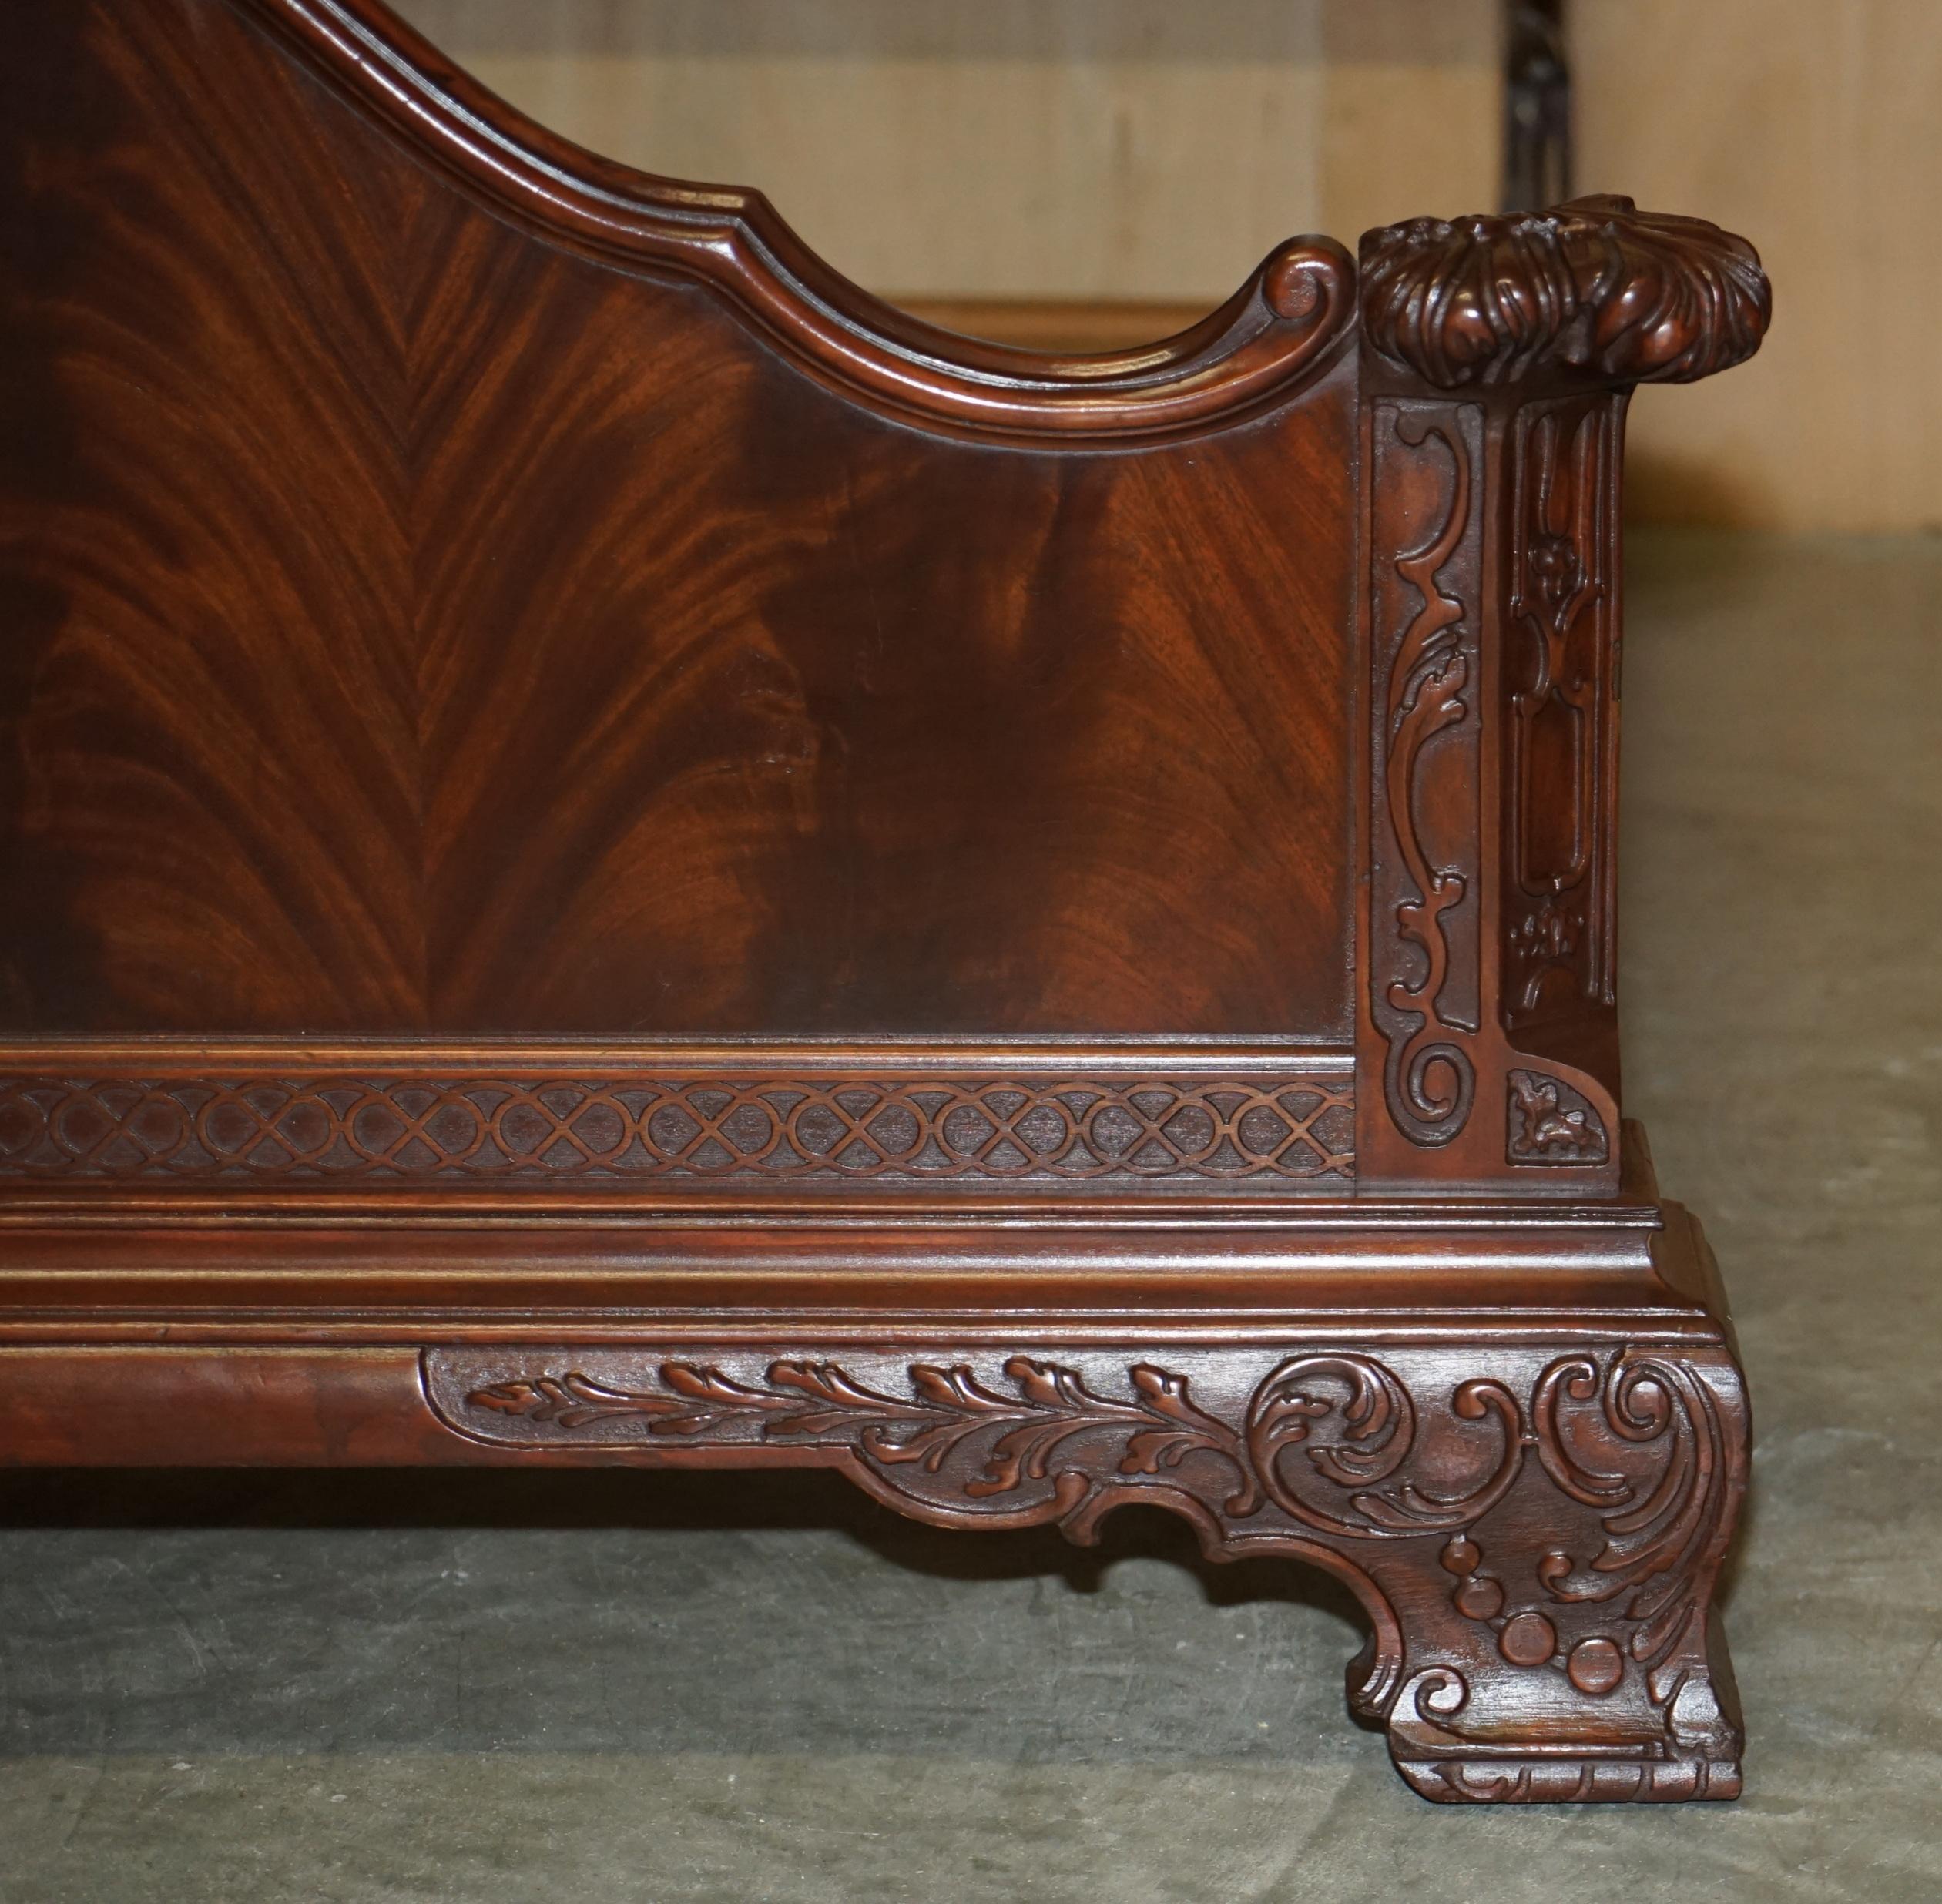 EXQUISITELY CARVED ANTIQUE ViCTORIAN CIRCA 1880 FLAMED HARDWOOD DOUBLE BED FRAME For Sale 1